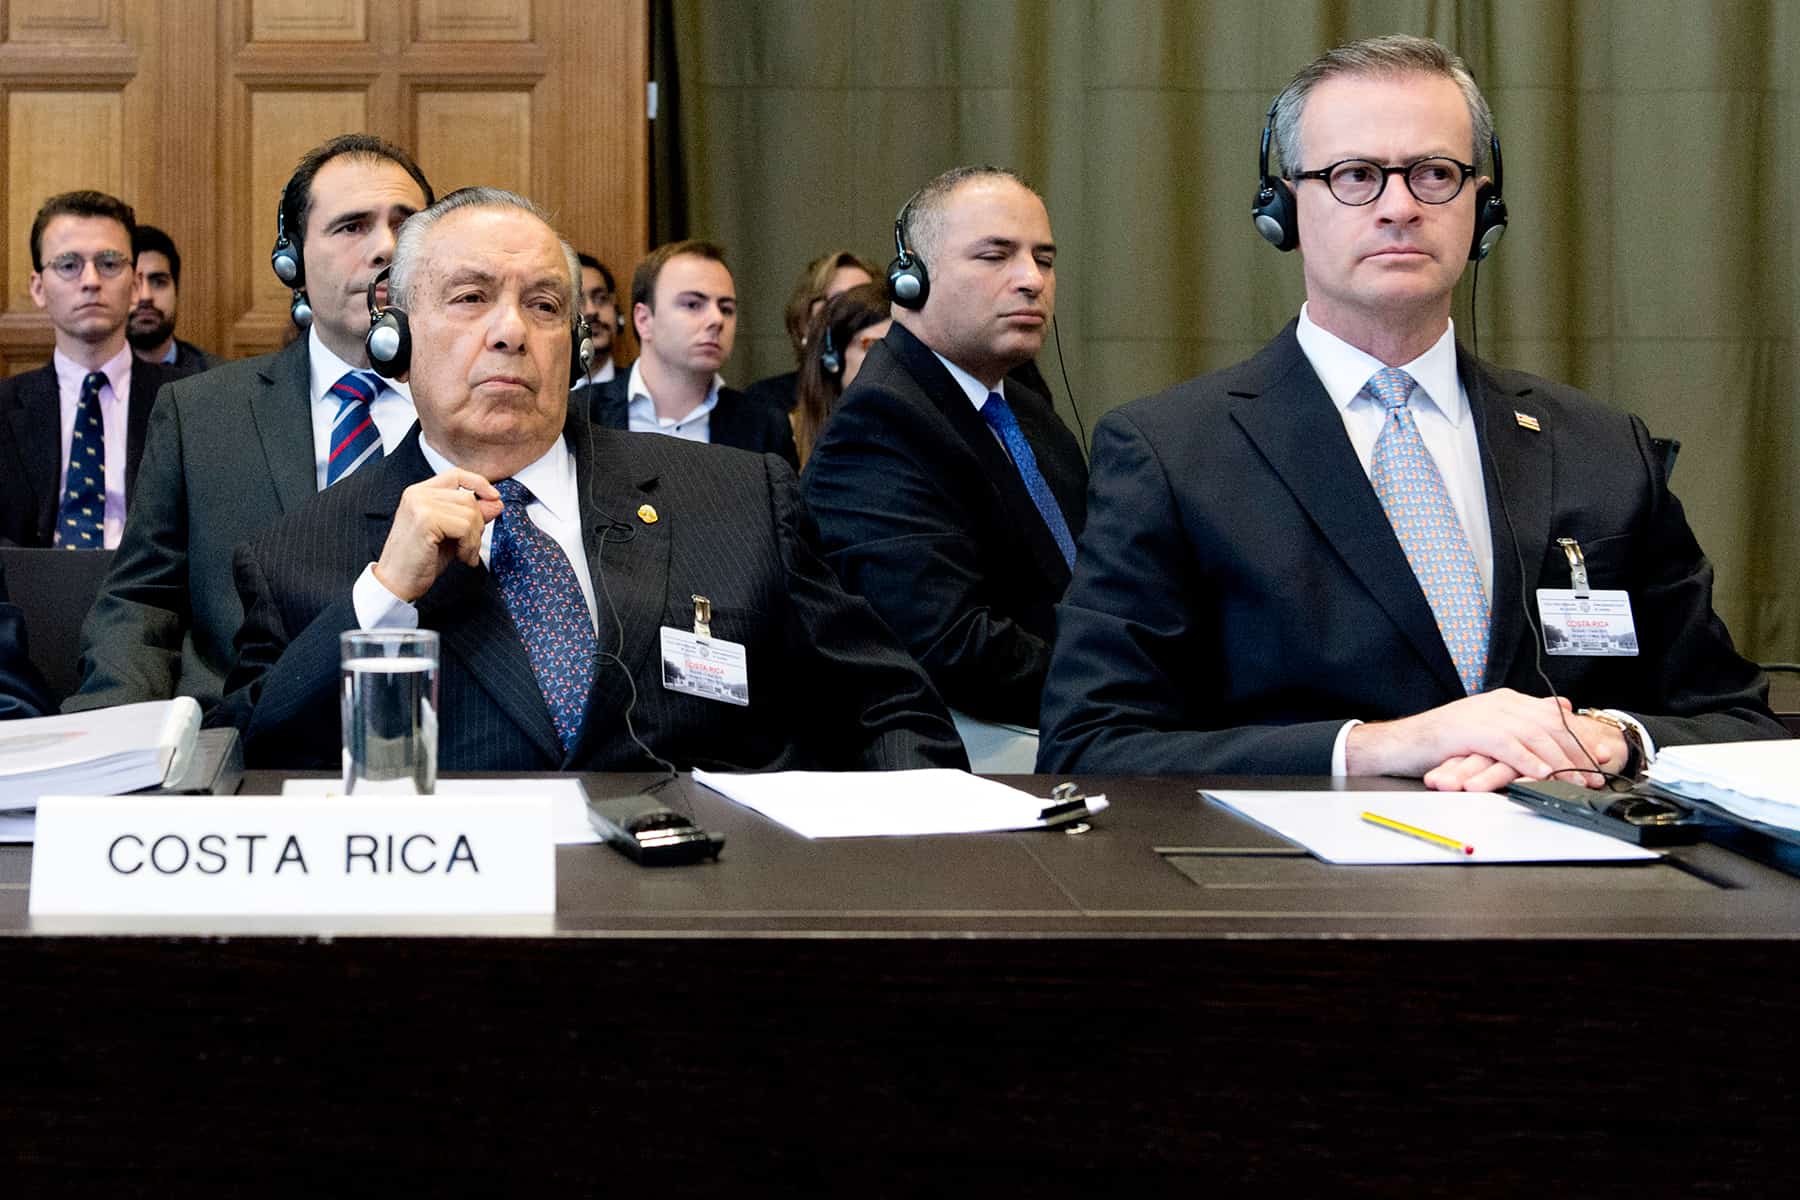 Costa Rica's representative before The Hague, Édgar Ugalde Álvarez (L), and Foreign Minister Manuel González Sánz (R) attend oral hearings at the International Court of Justice, April 21, 2015.